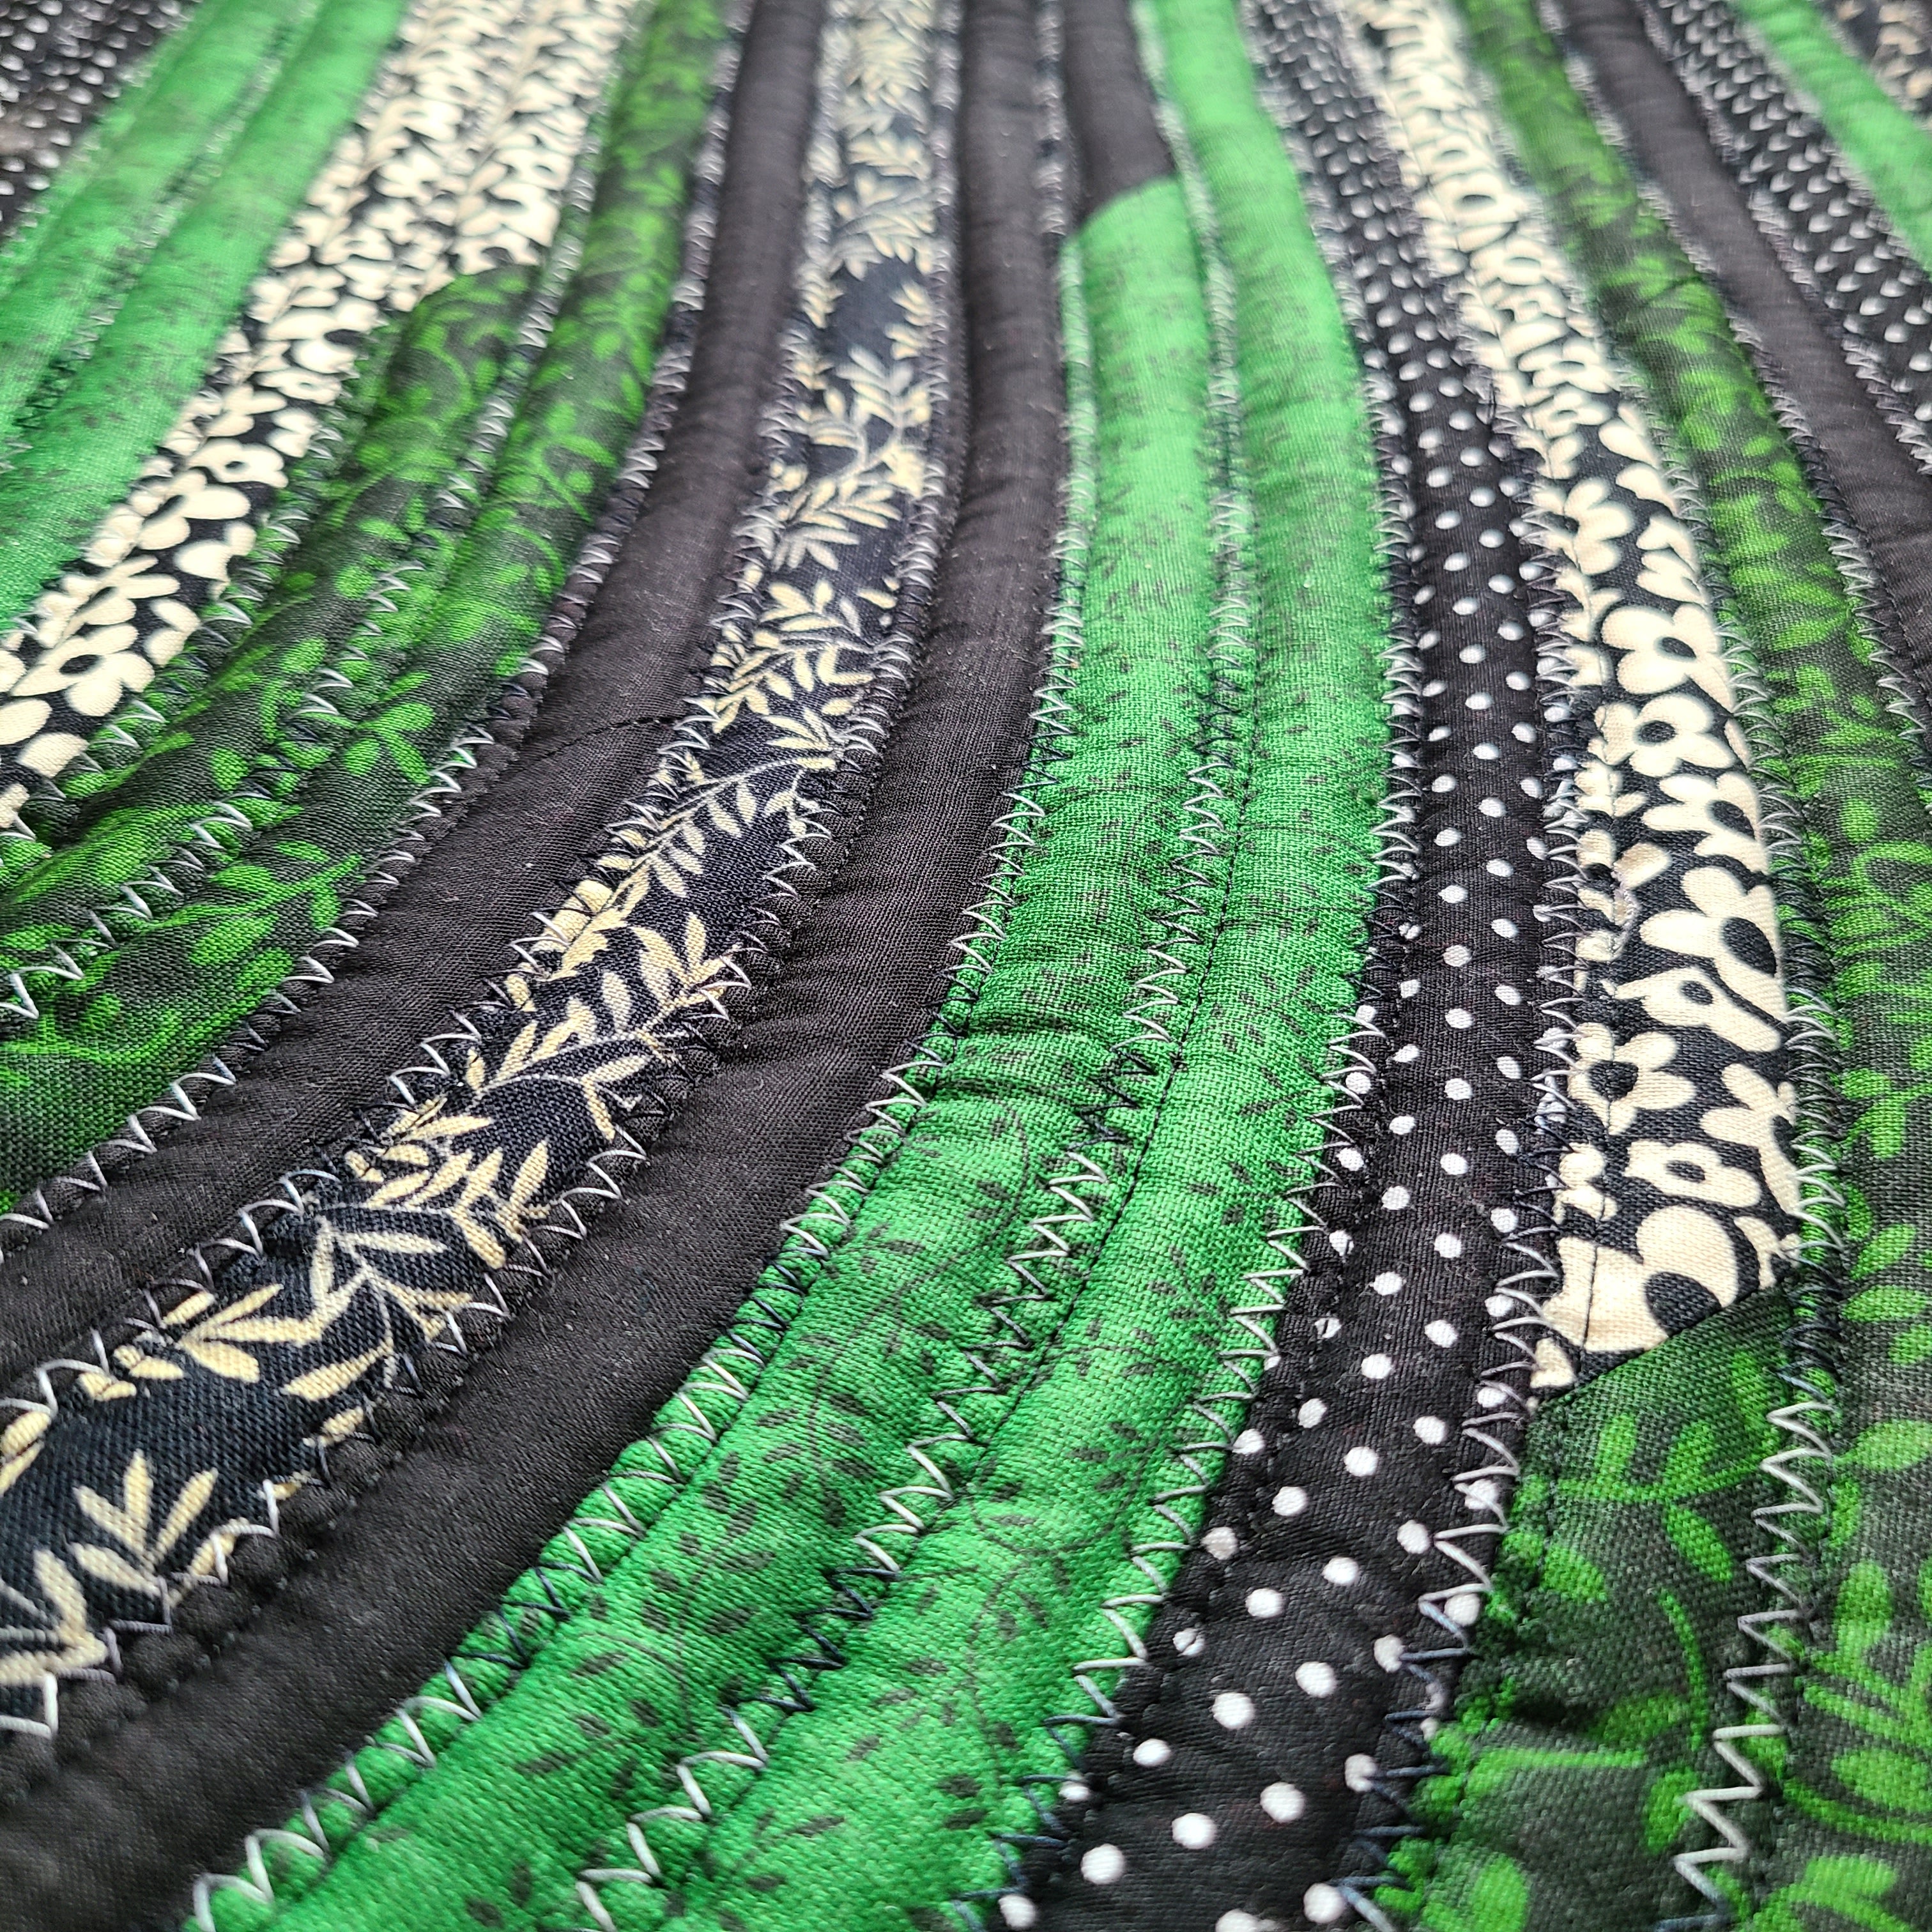 Black and Green Jelly Roll rug